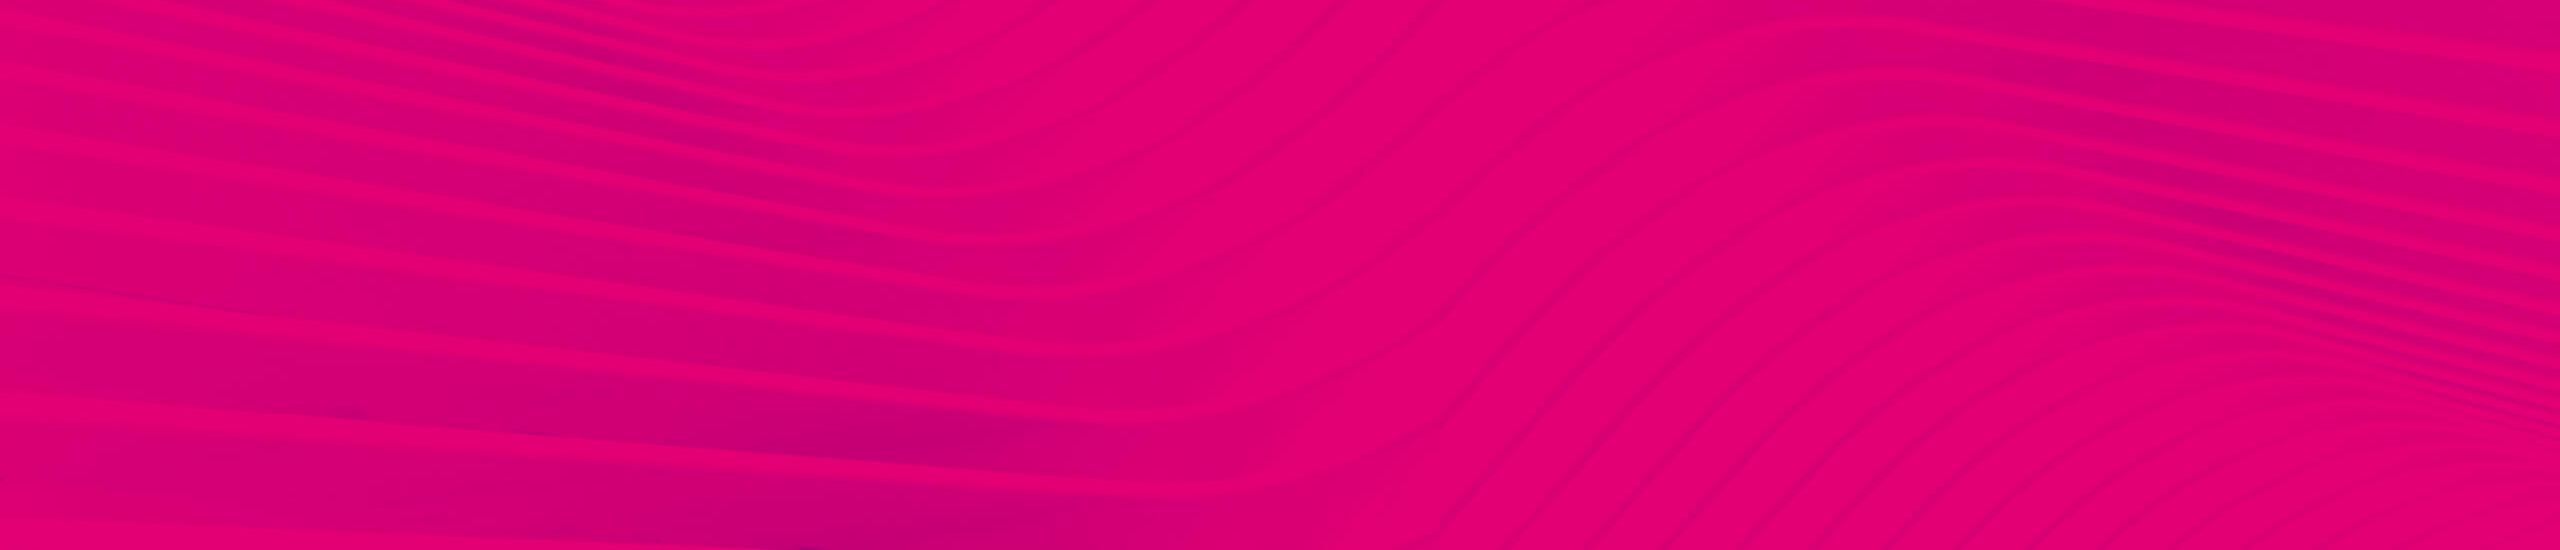 magenta background related to white paper: How to Migrate your IT Landscape to AWS